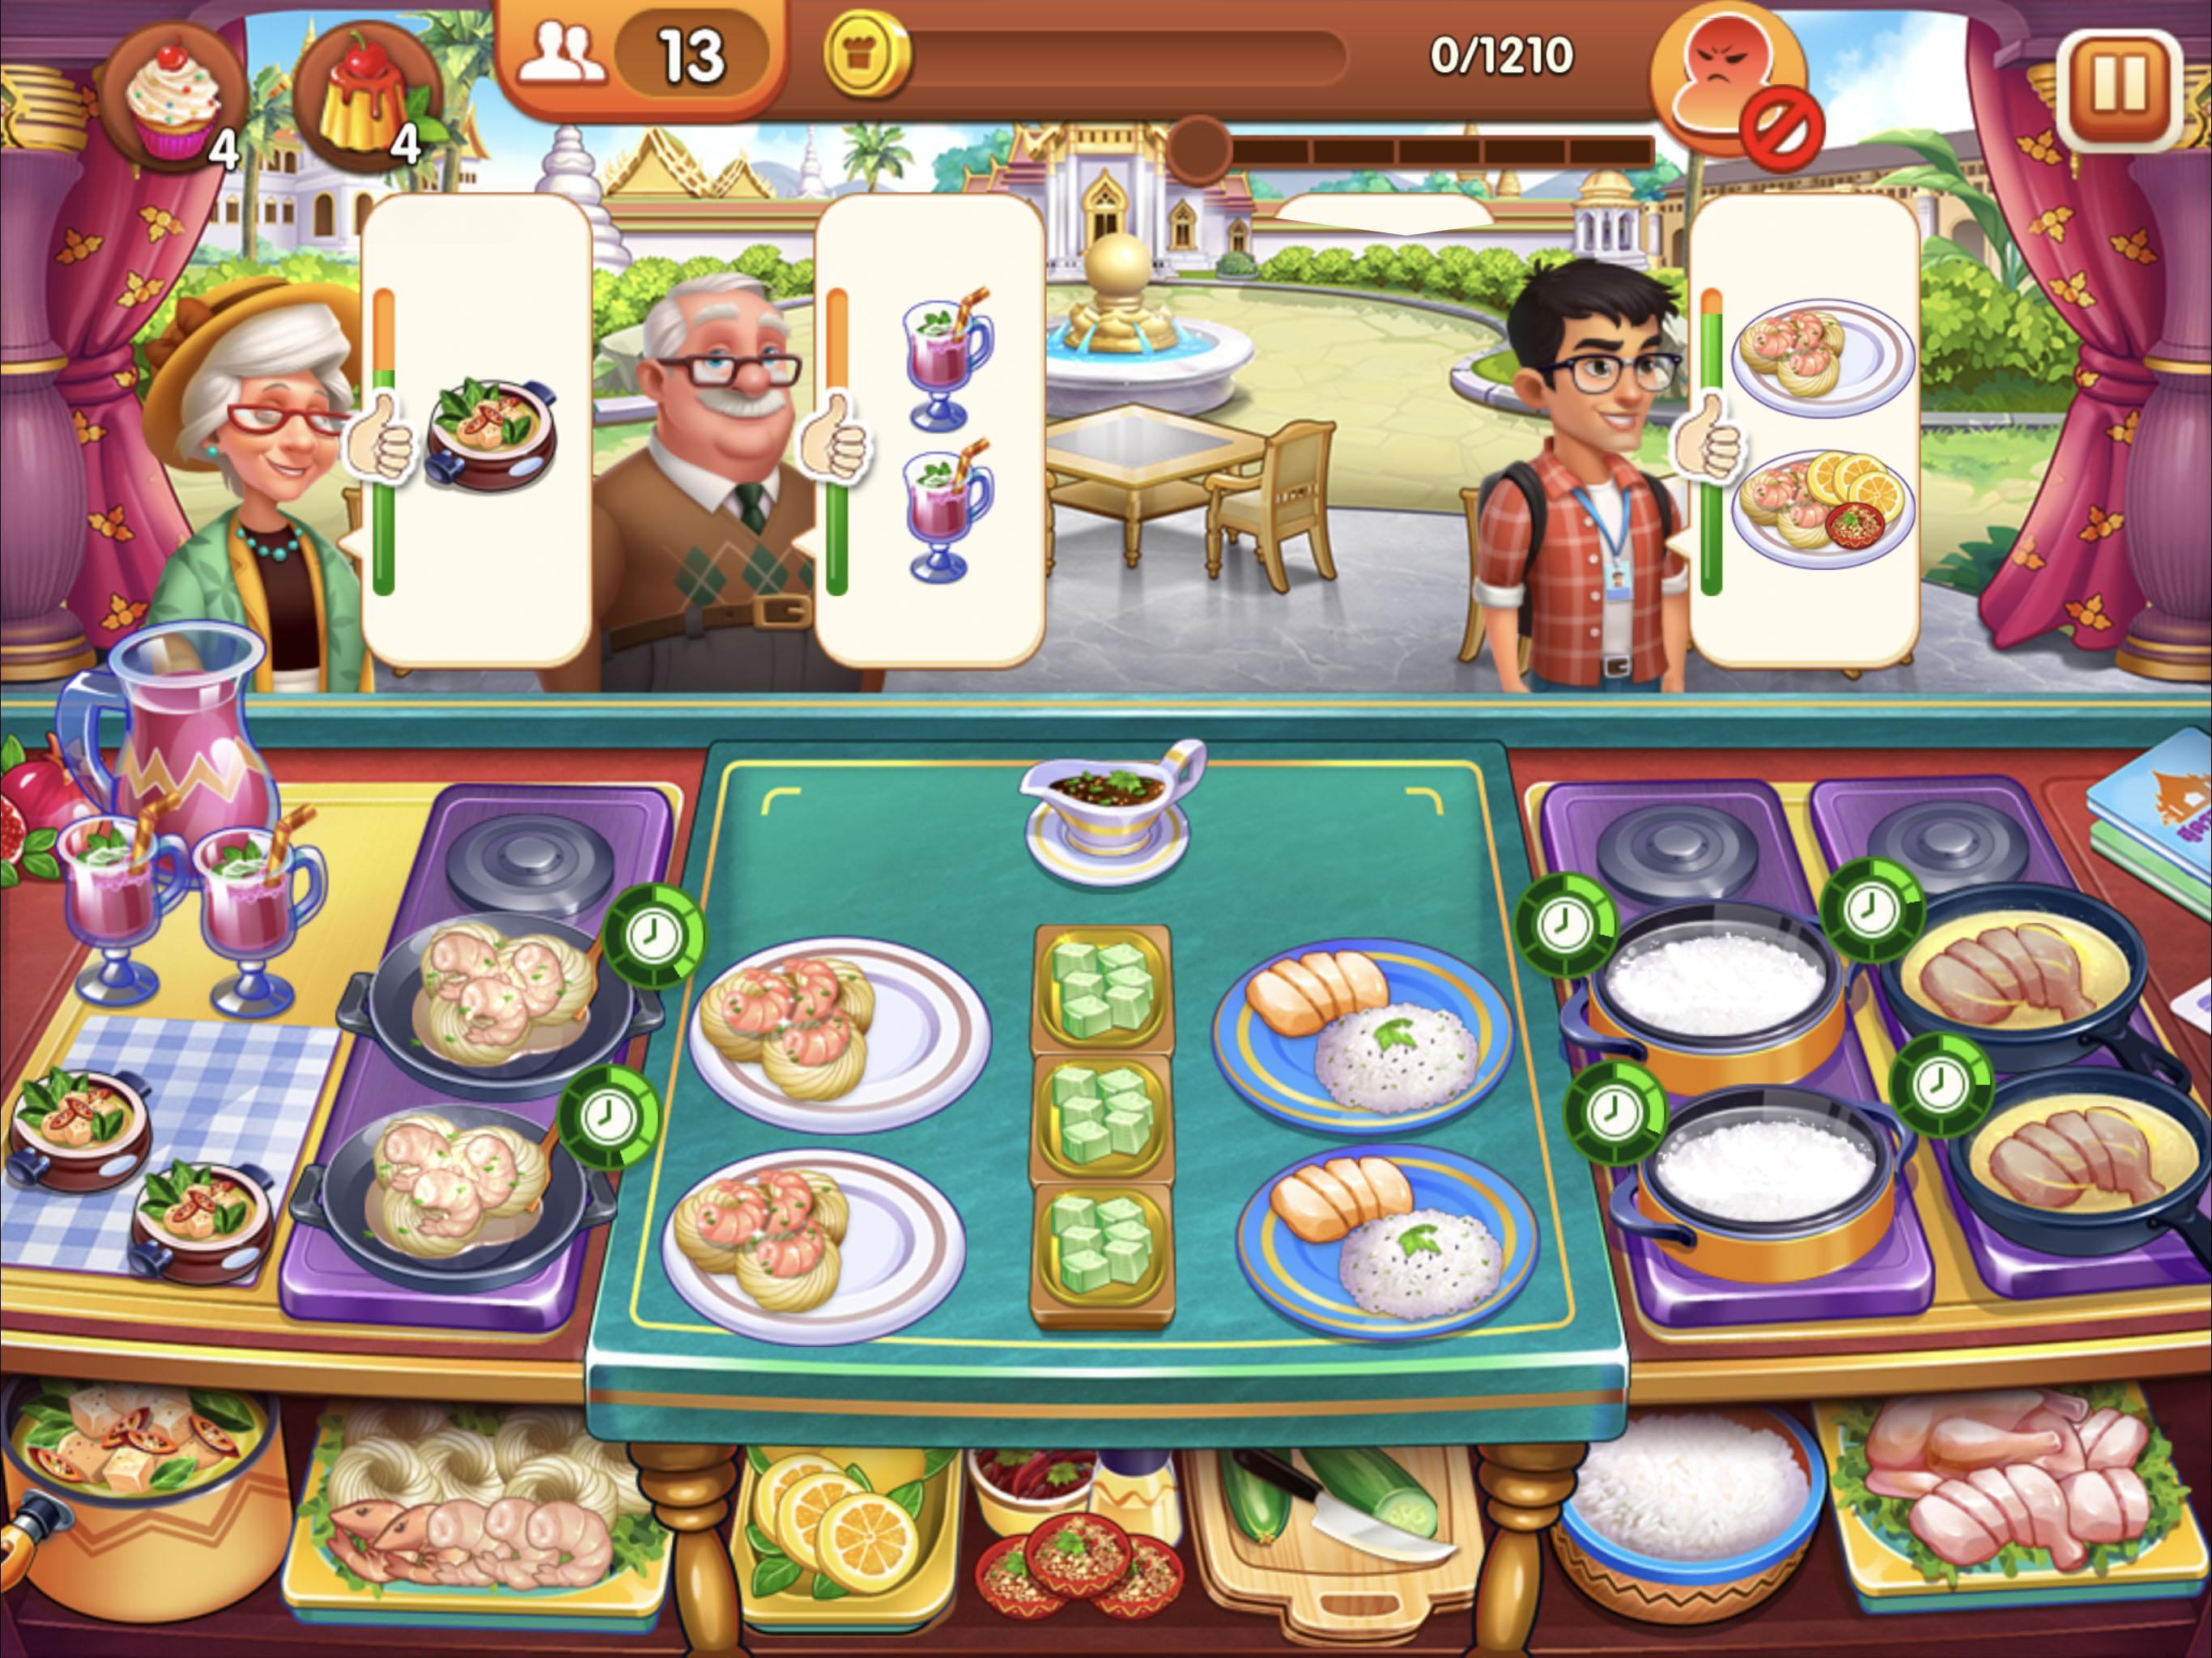 Cooking Madness - A Chef's Restaurant Games for Android - APK Download